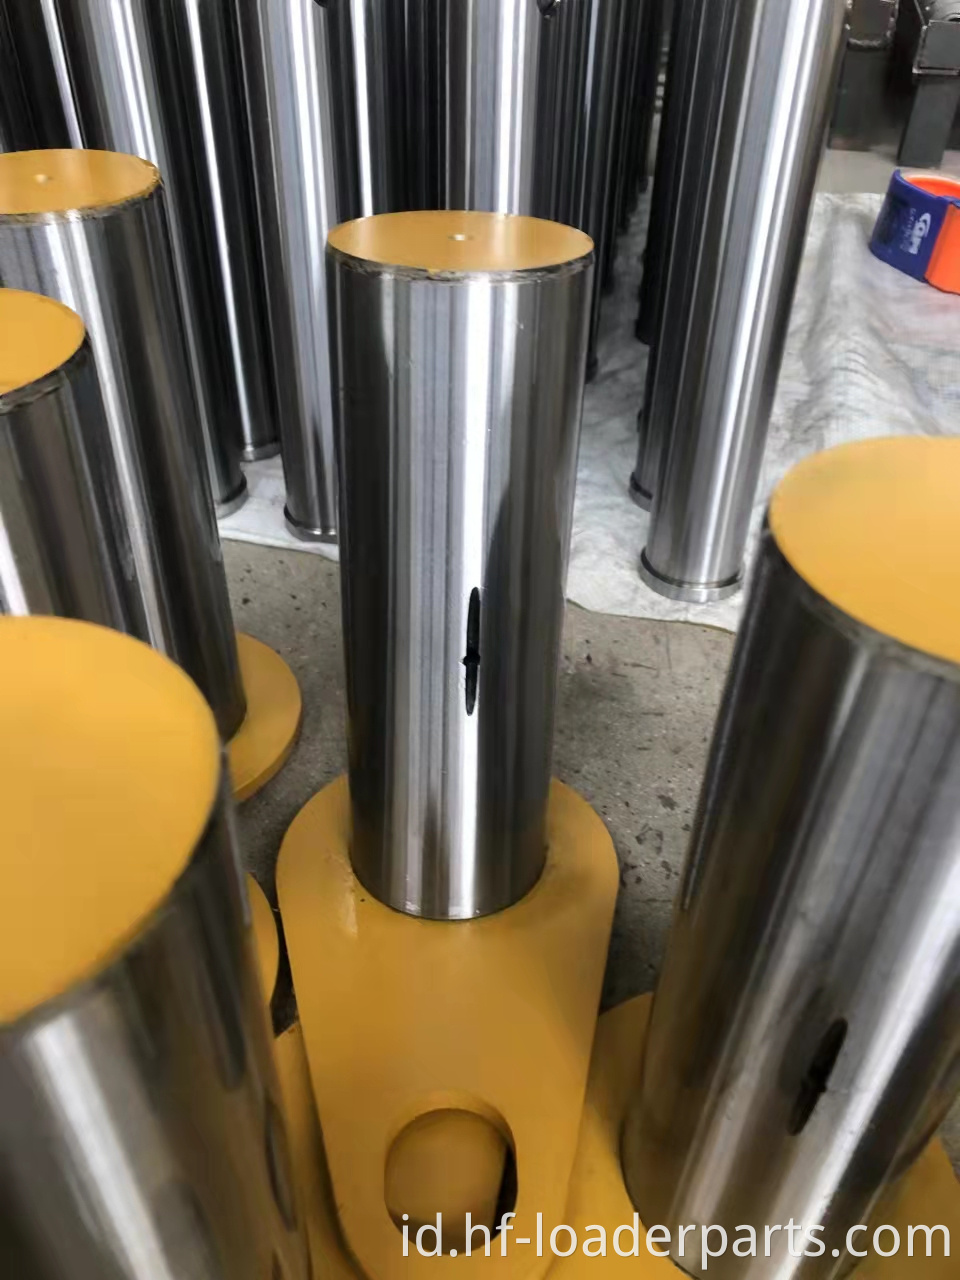 All kinds of Loader Pin Shaft Bushing for SDLG Liugong XCMG